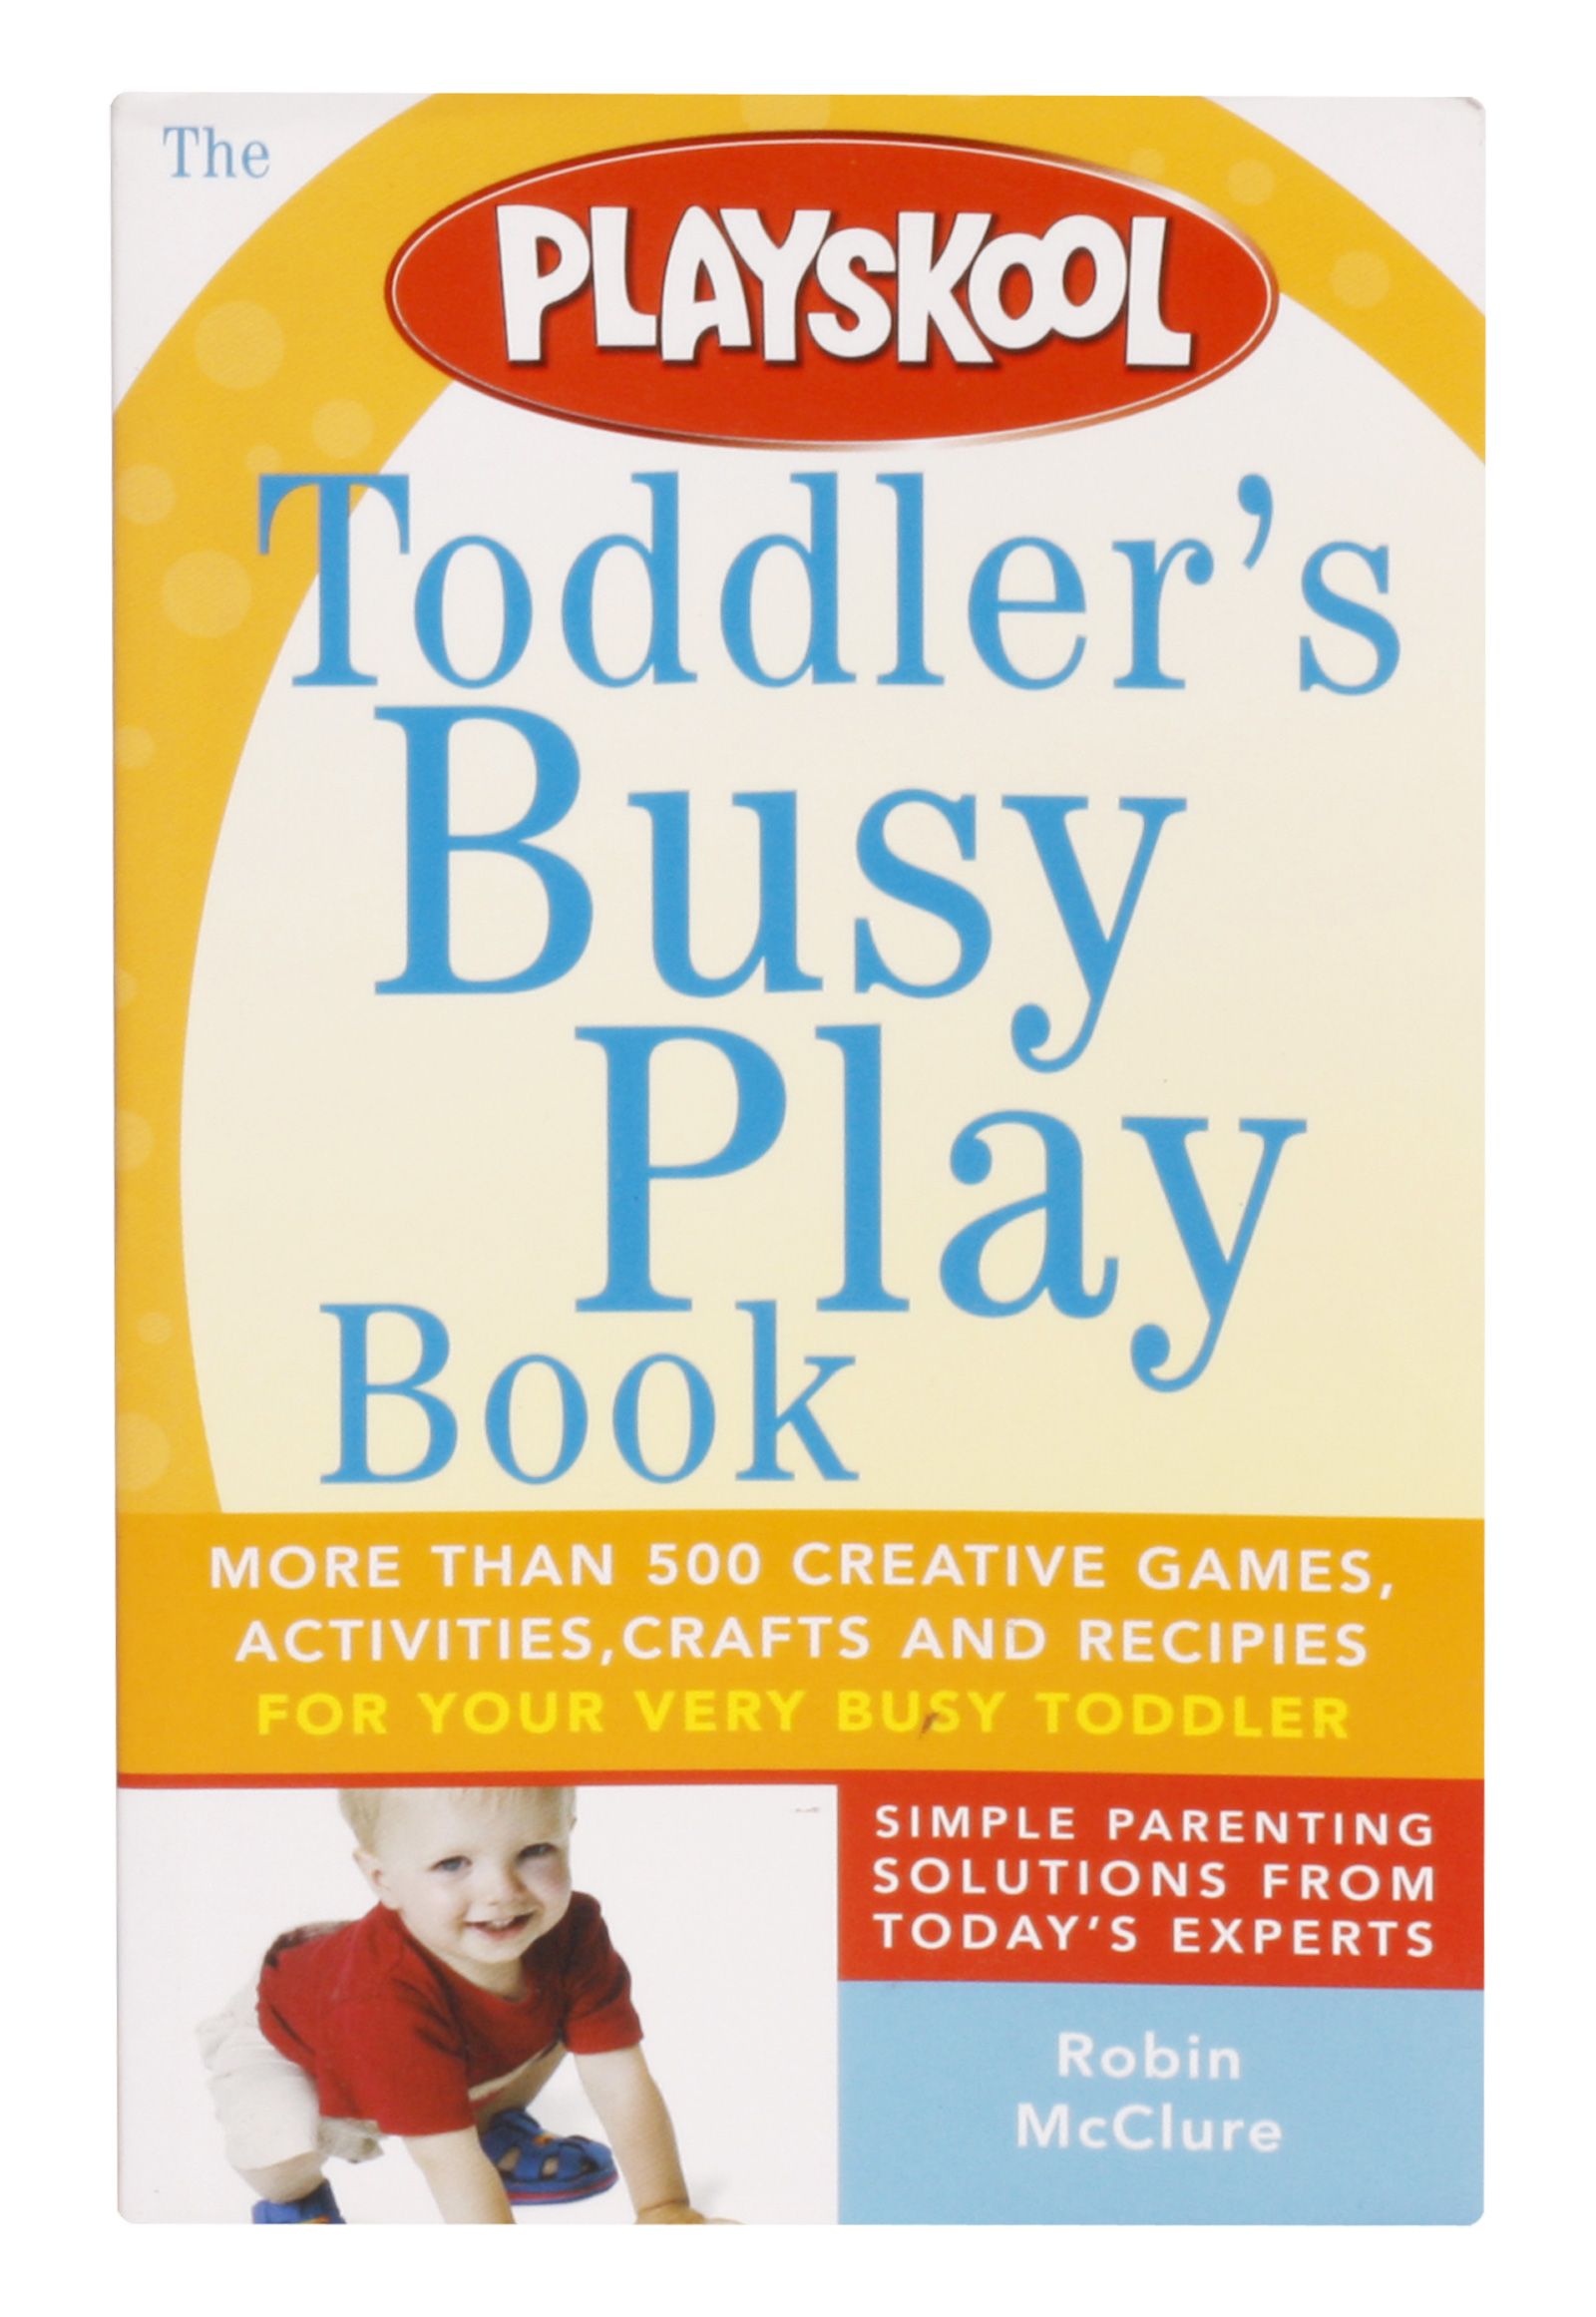 Playskool - Toddlers Busy Play Book